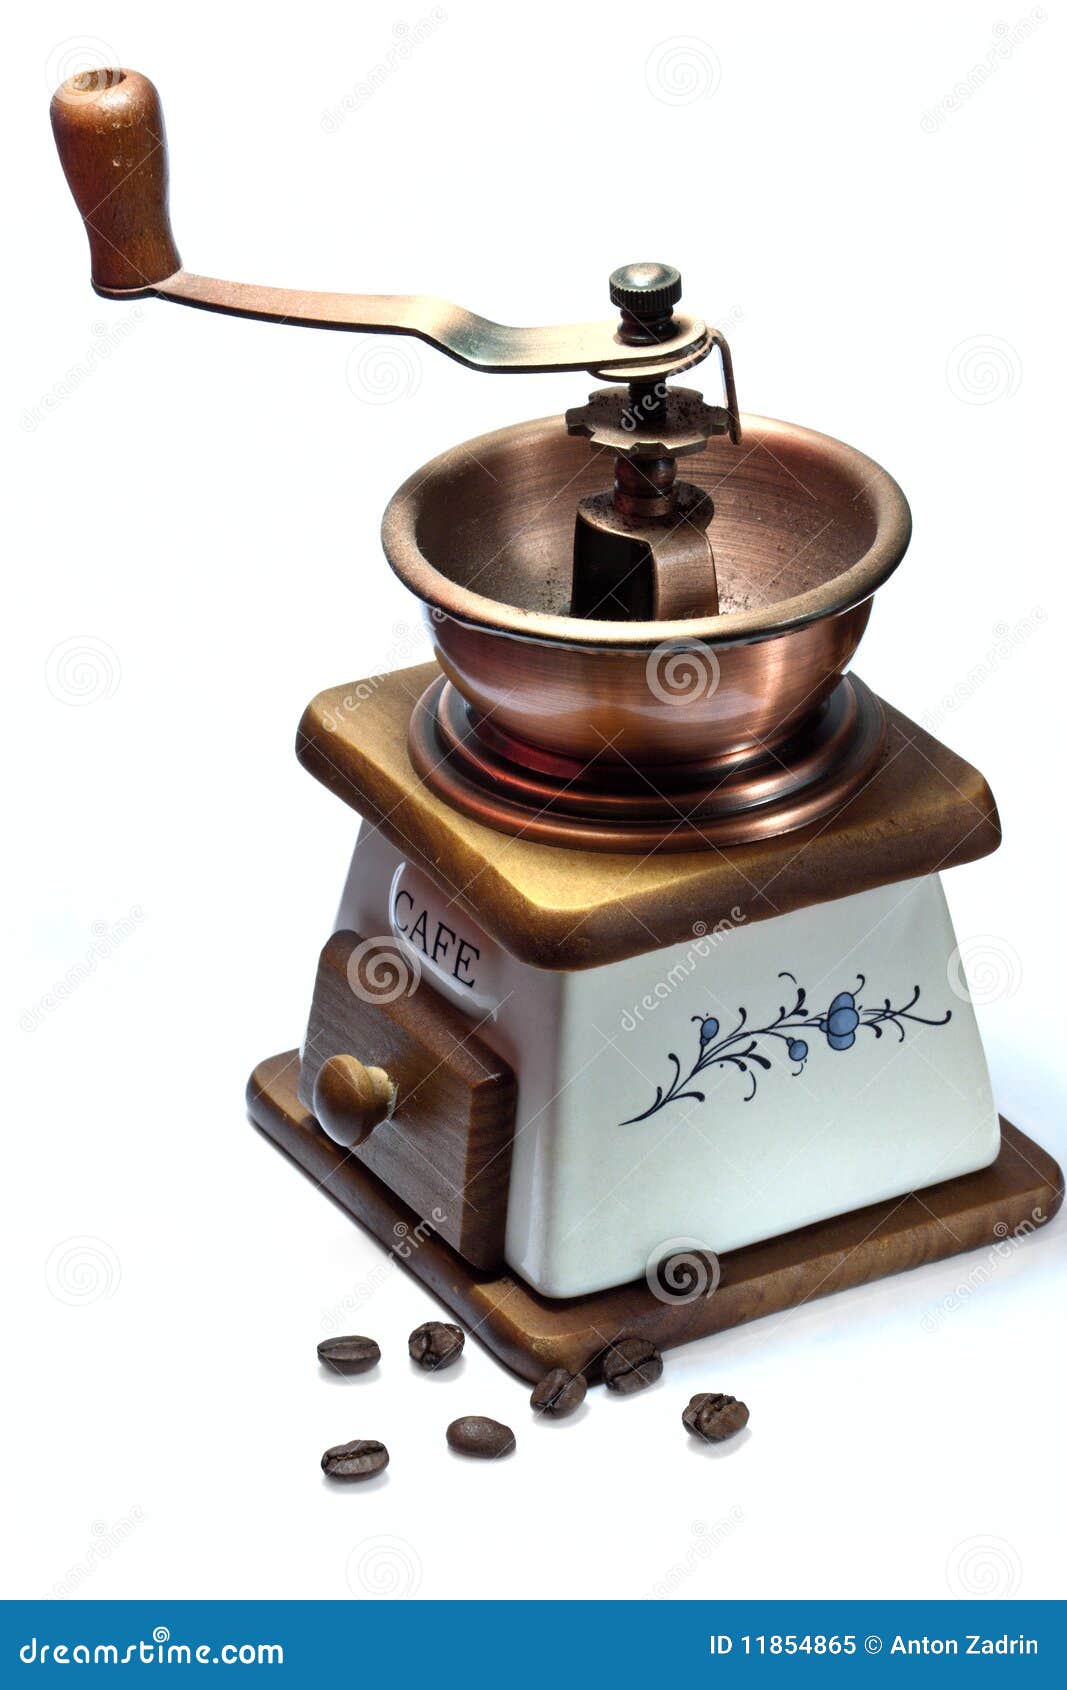 coffee grinder clipart - photo #39